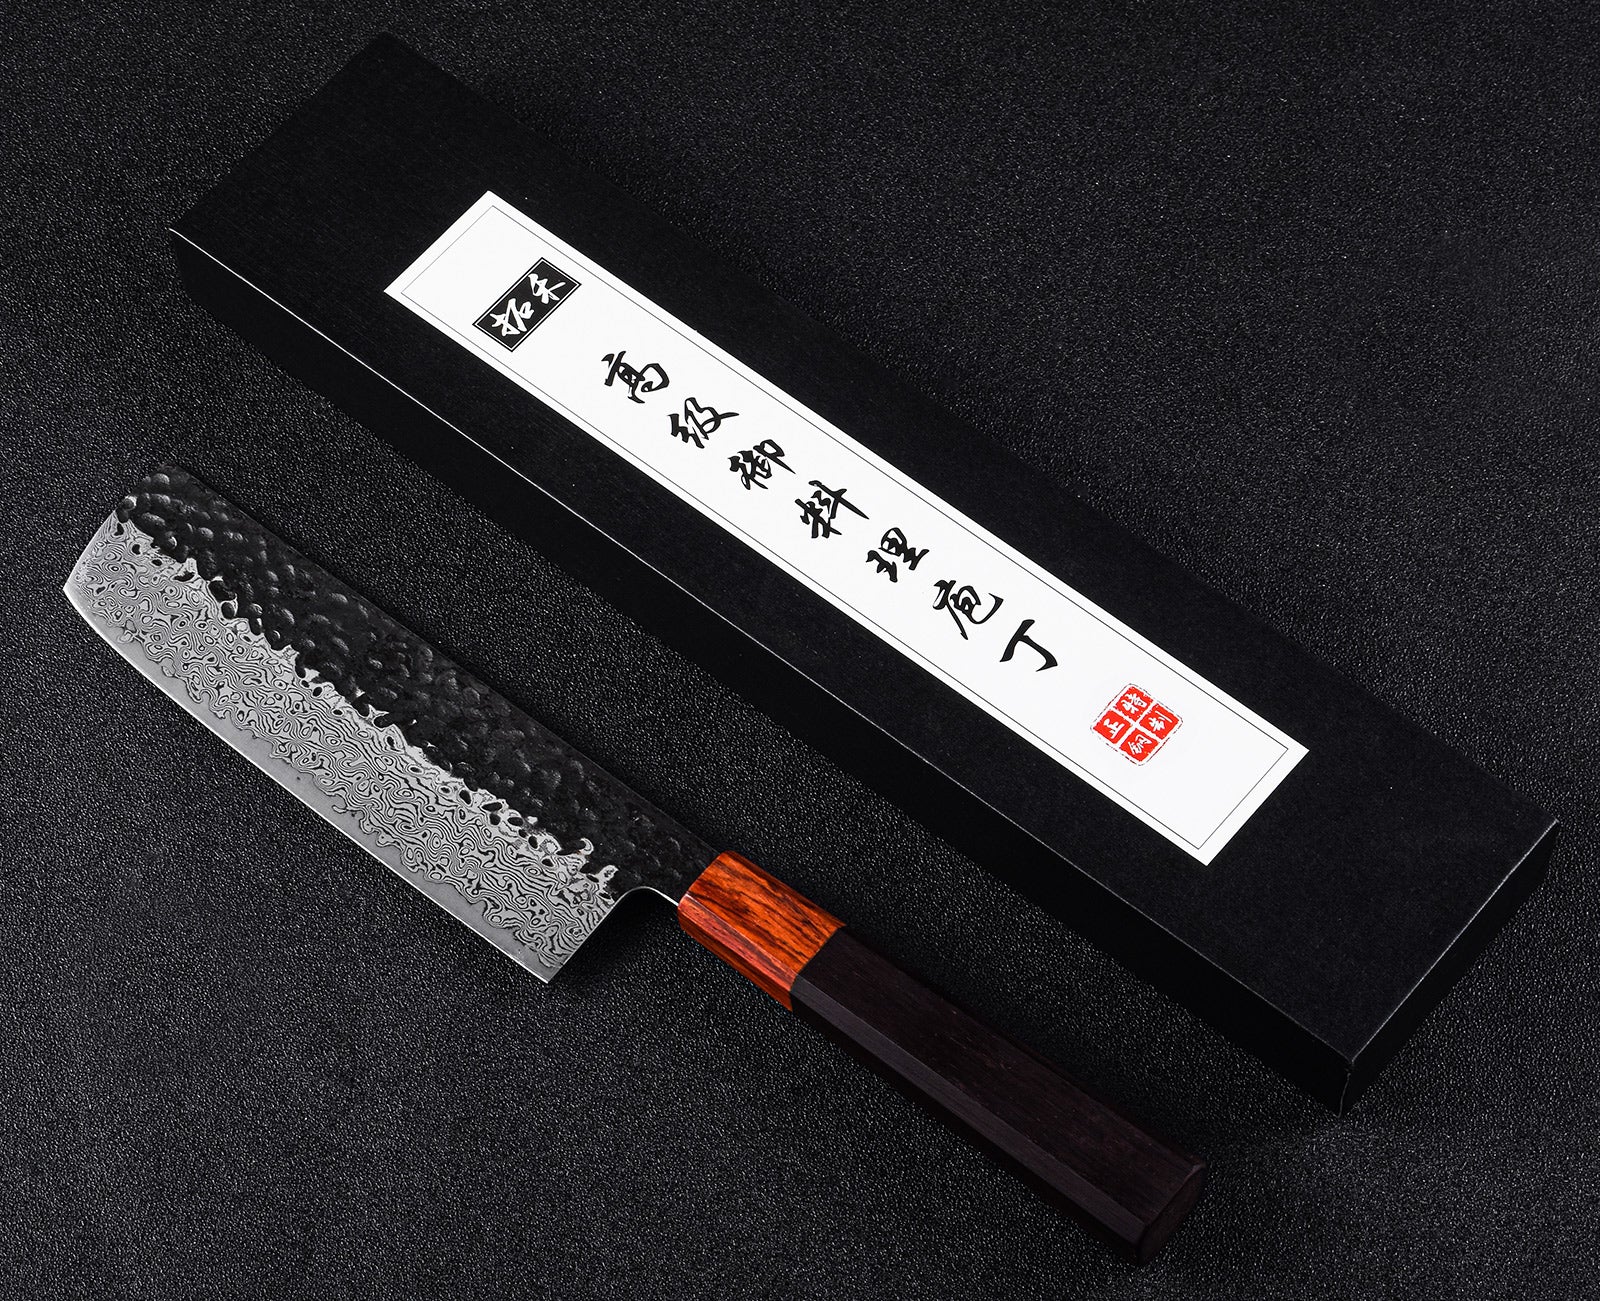 Best Nakiri knives usually have a Granton edge that is hollow enough to form air packets between the slice and indentations, which keeps sticking of fruit or vegetable under target, at bay. Further, because Nakiris are dedicated to fruits and vegetables, there is no issue of bacterial cross contamination.